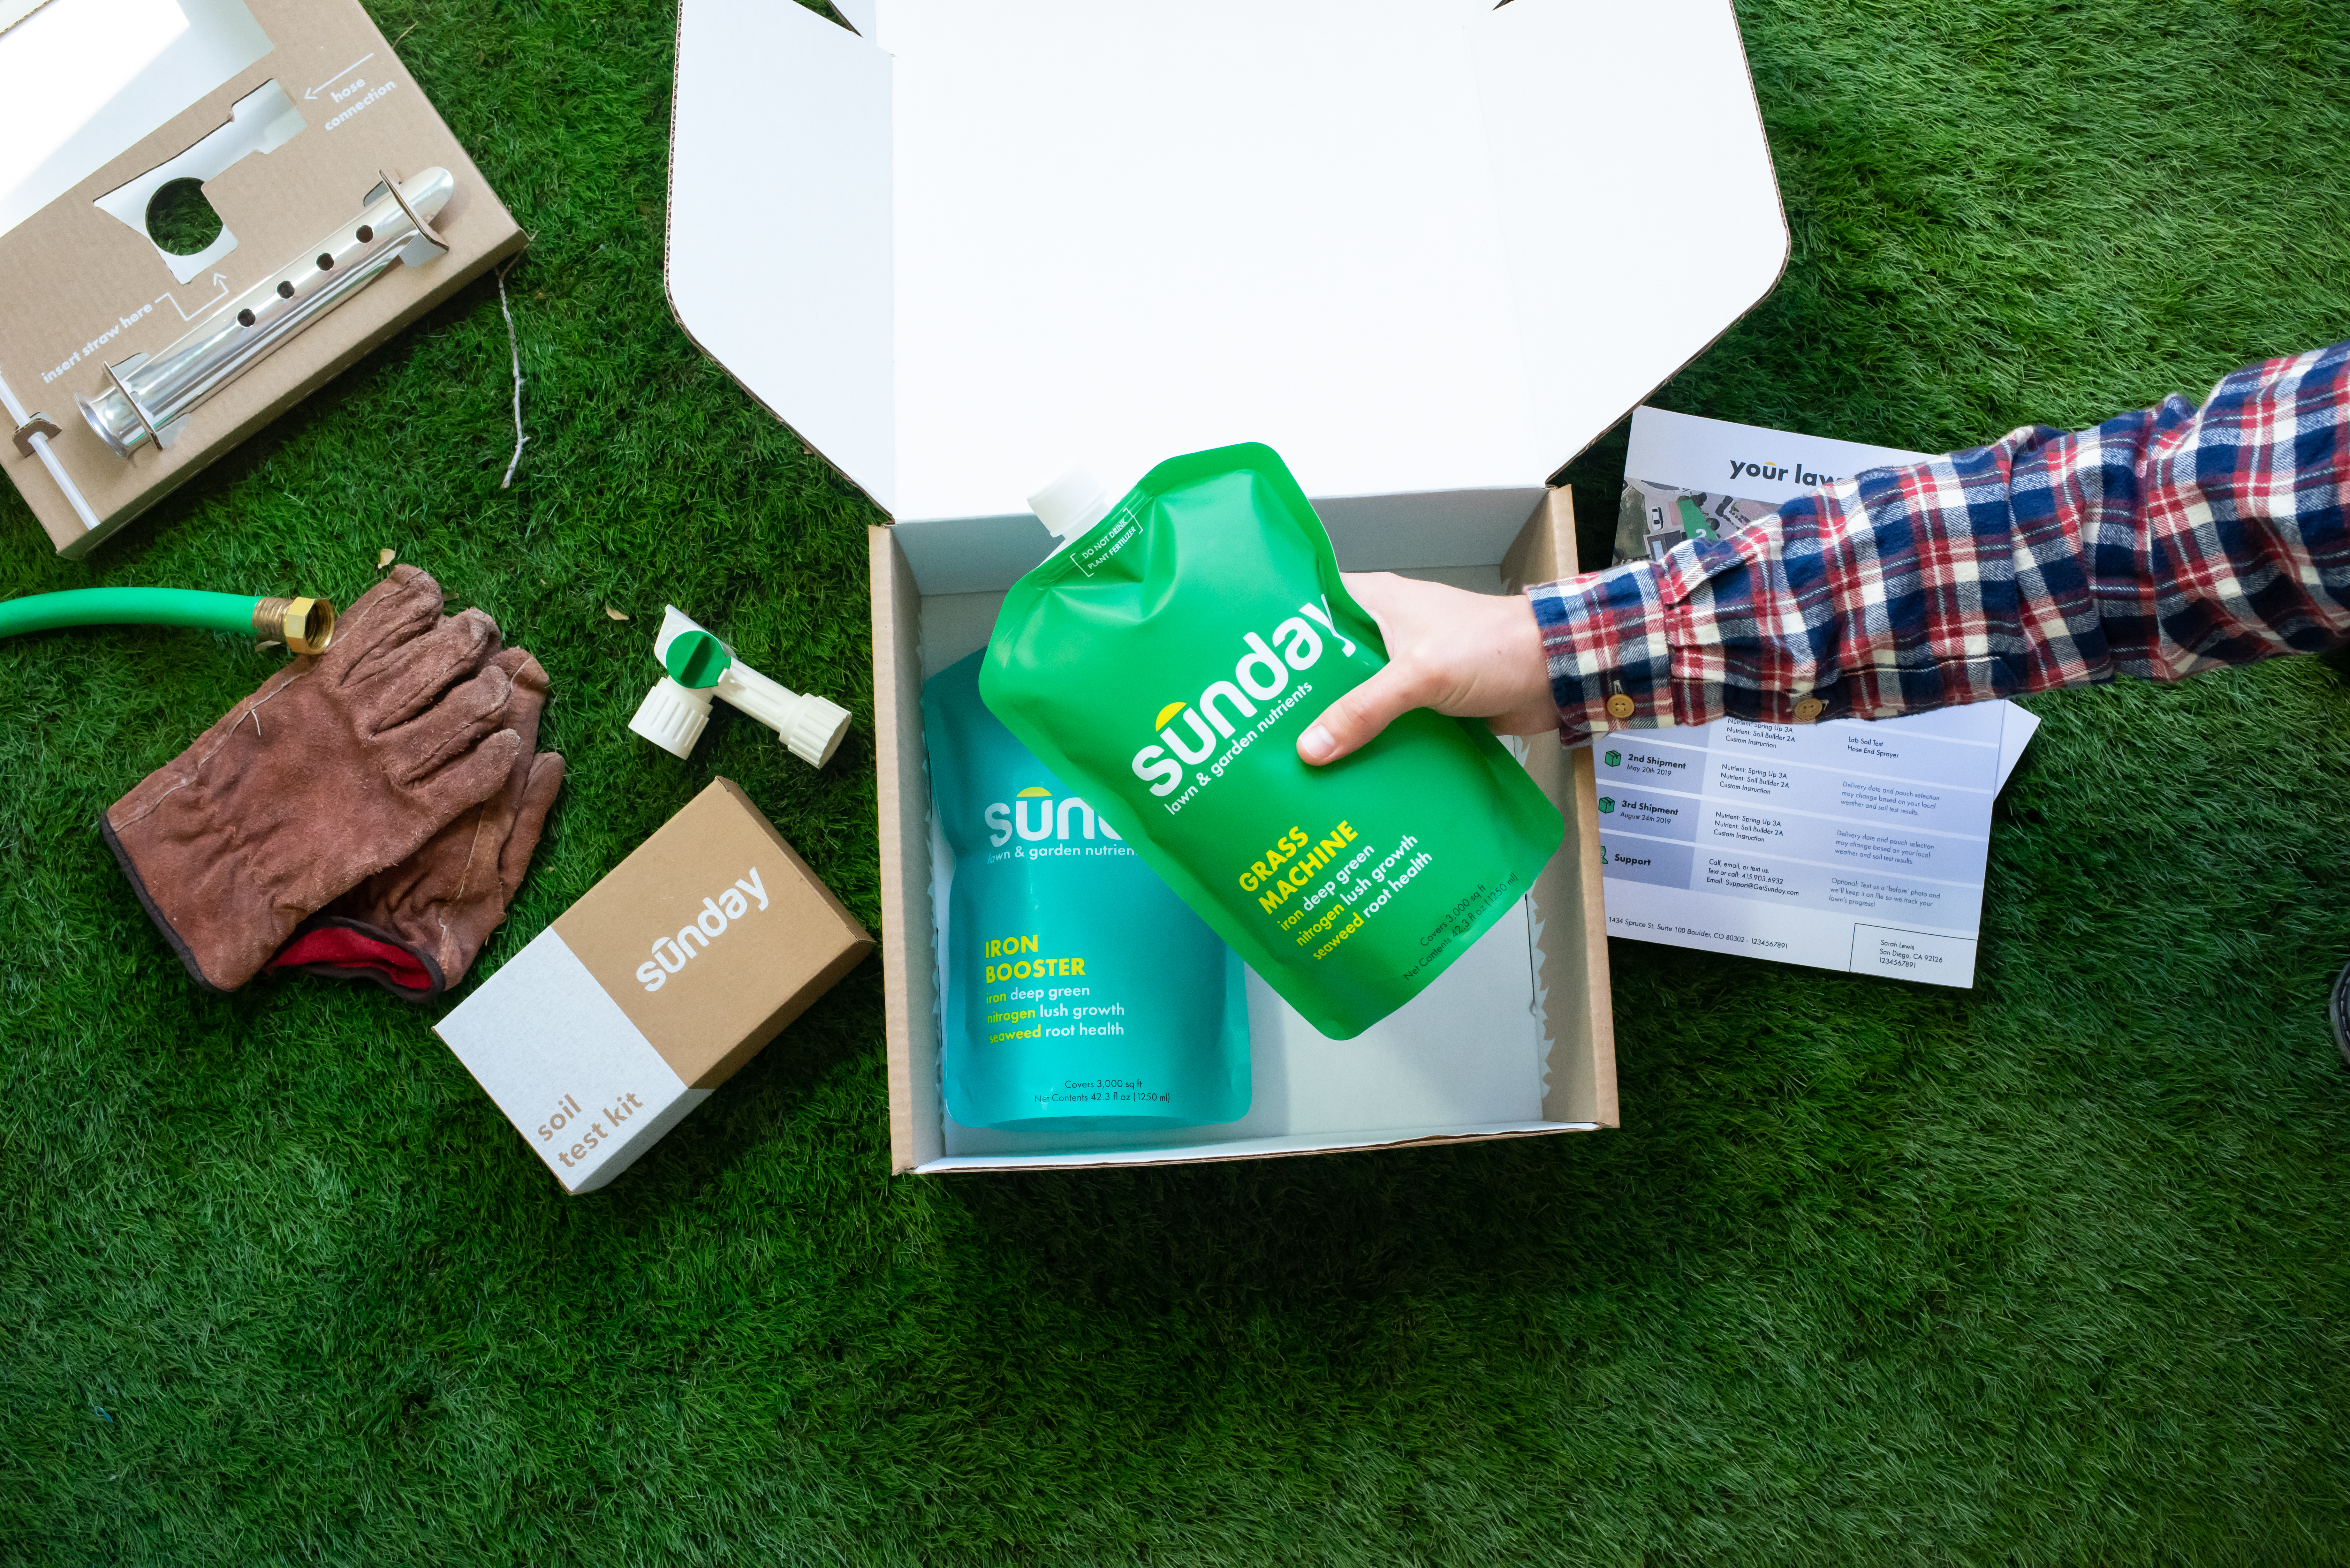 Lawn startup Sunday raises millions to help you with your